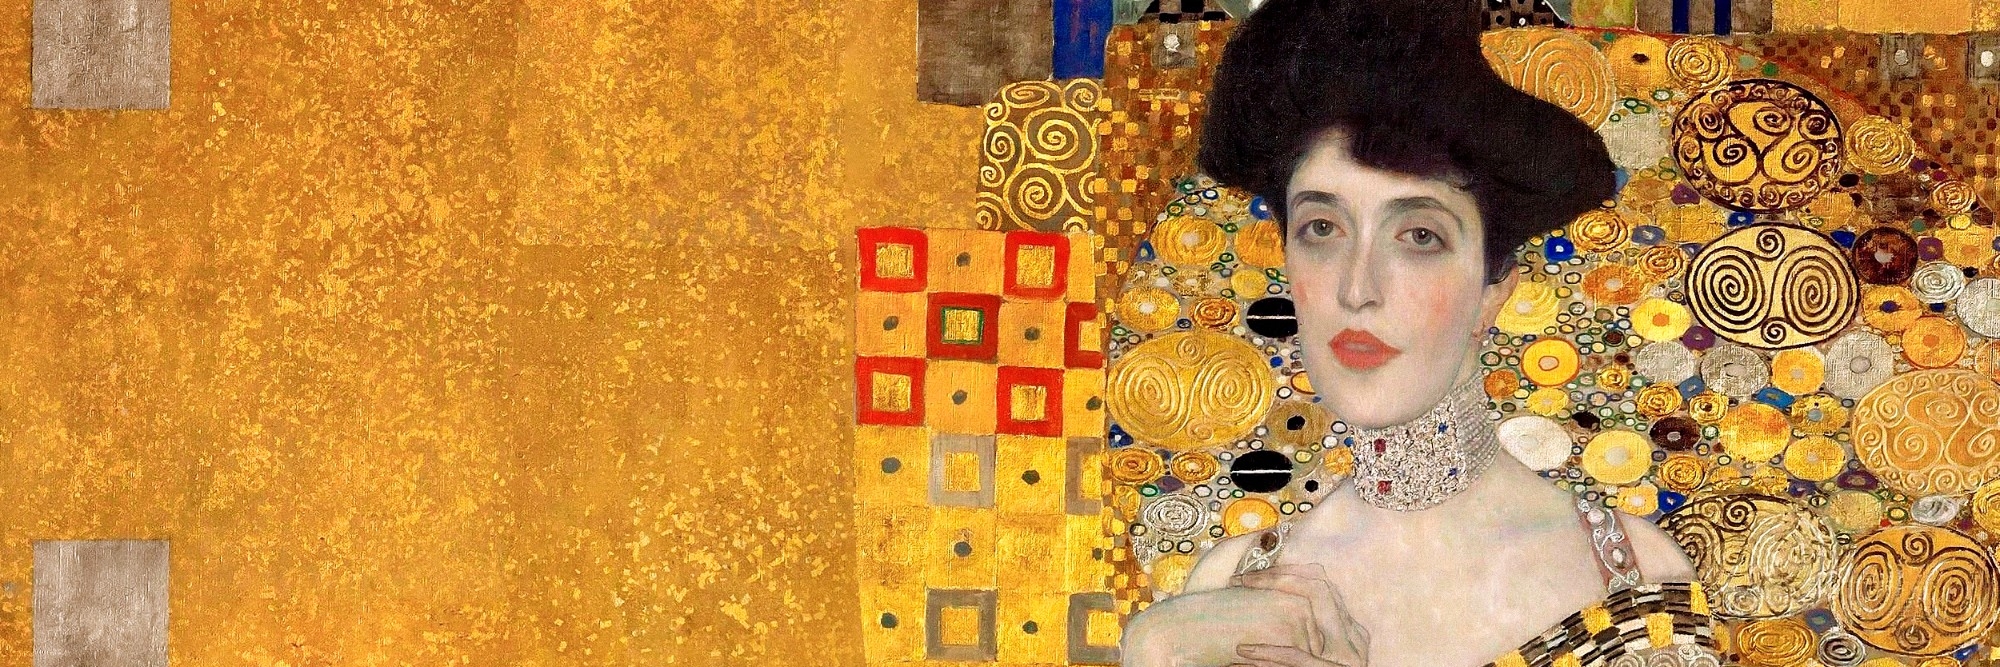 Gustav Klimt's Death and Life (1910-1915) famous painting. Original from Wikimedia Commons. Digitally enhanced by rawpixel.